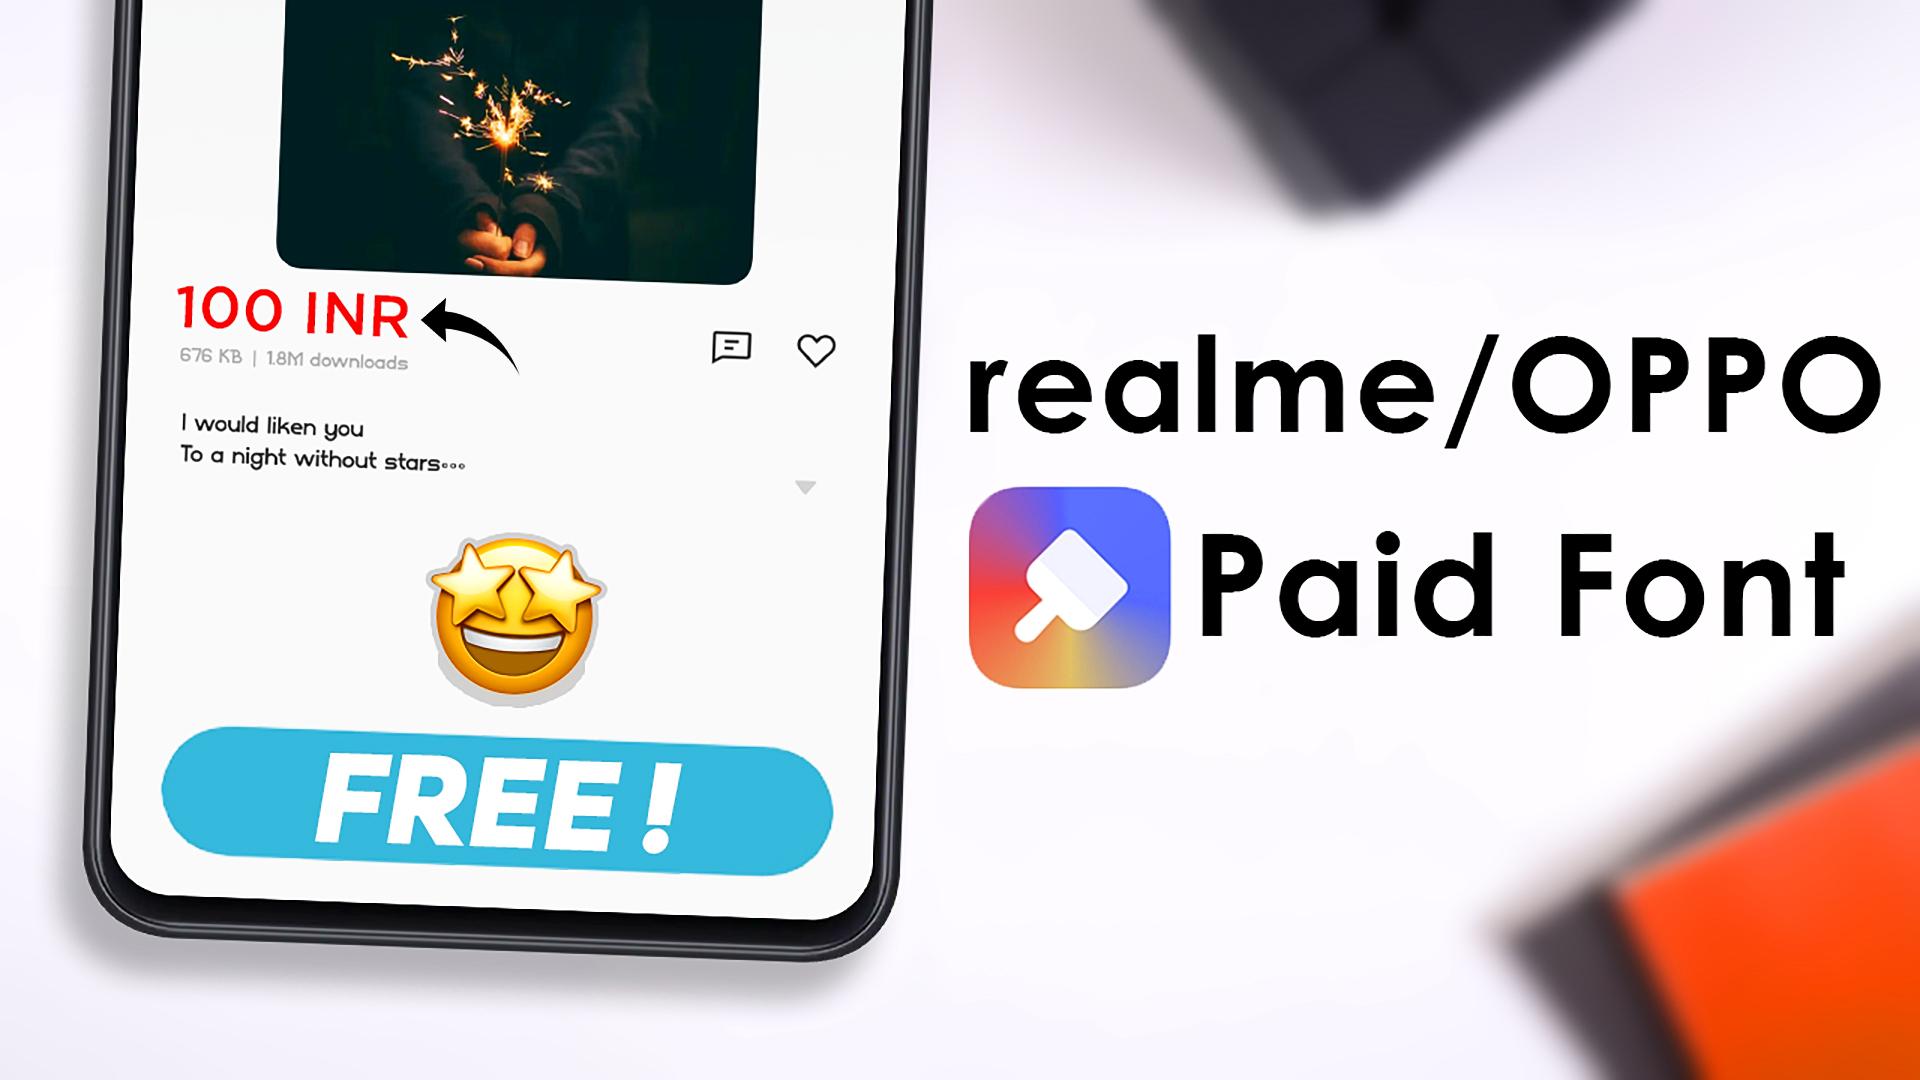 Realme OPPO paid font free